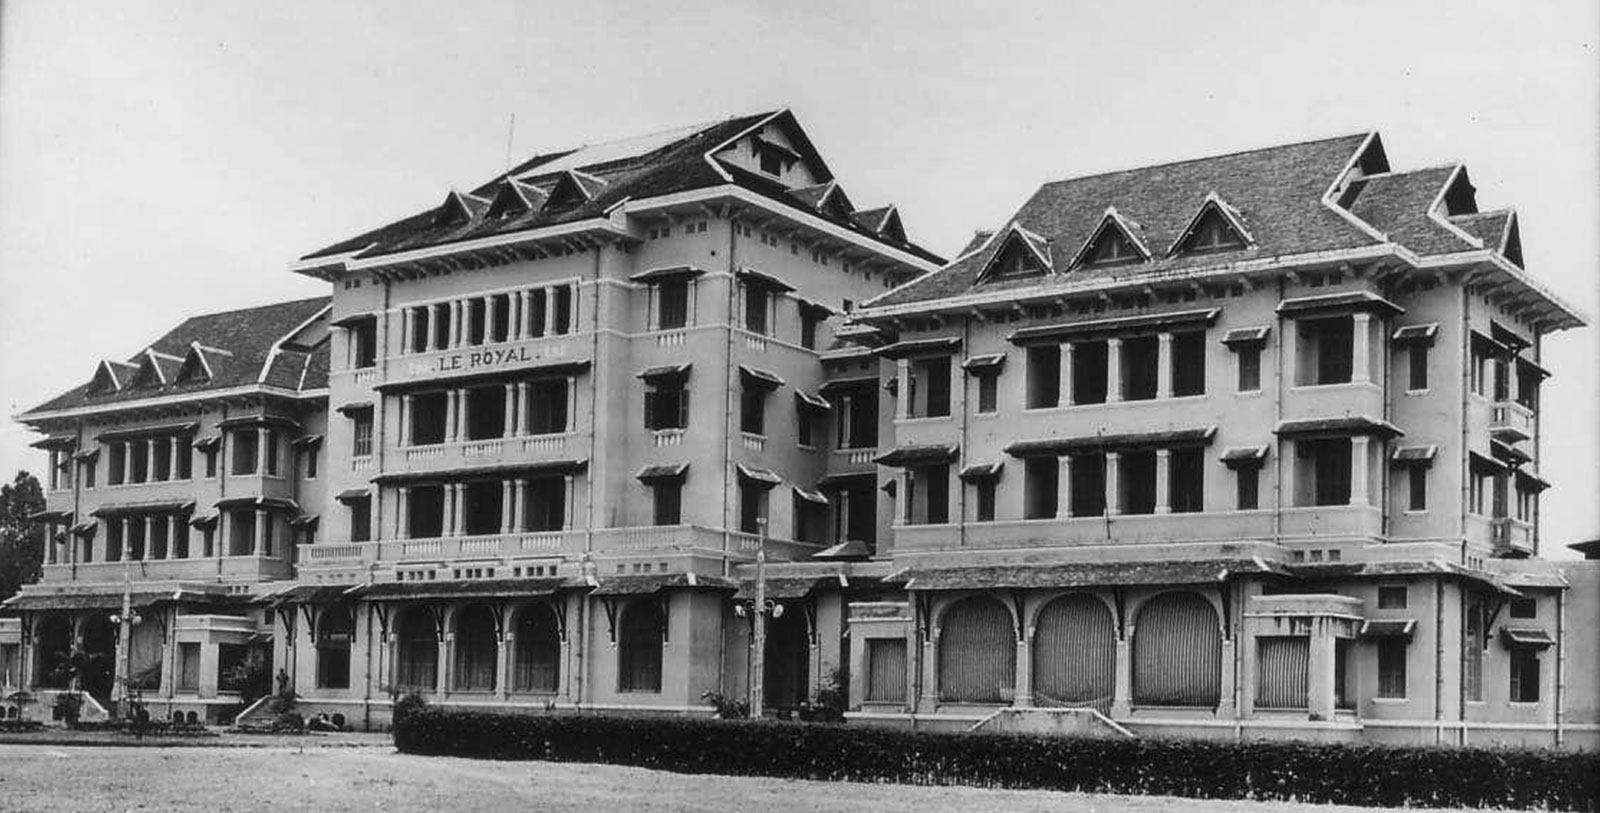 Historical Drawing of Exterior, Raffles Hotel Le Royal, 1929, Member of Historic Hotels Worldwide, in Phnom Penh, Cambodia.